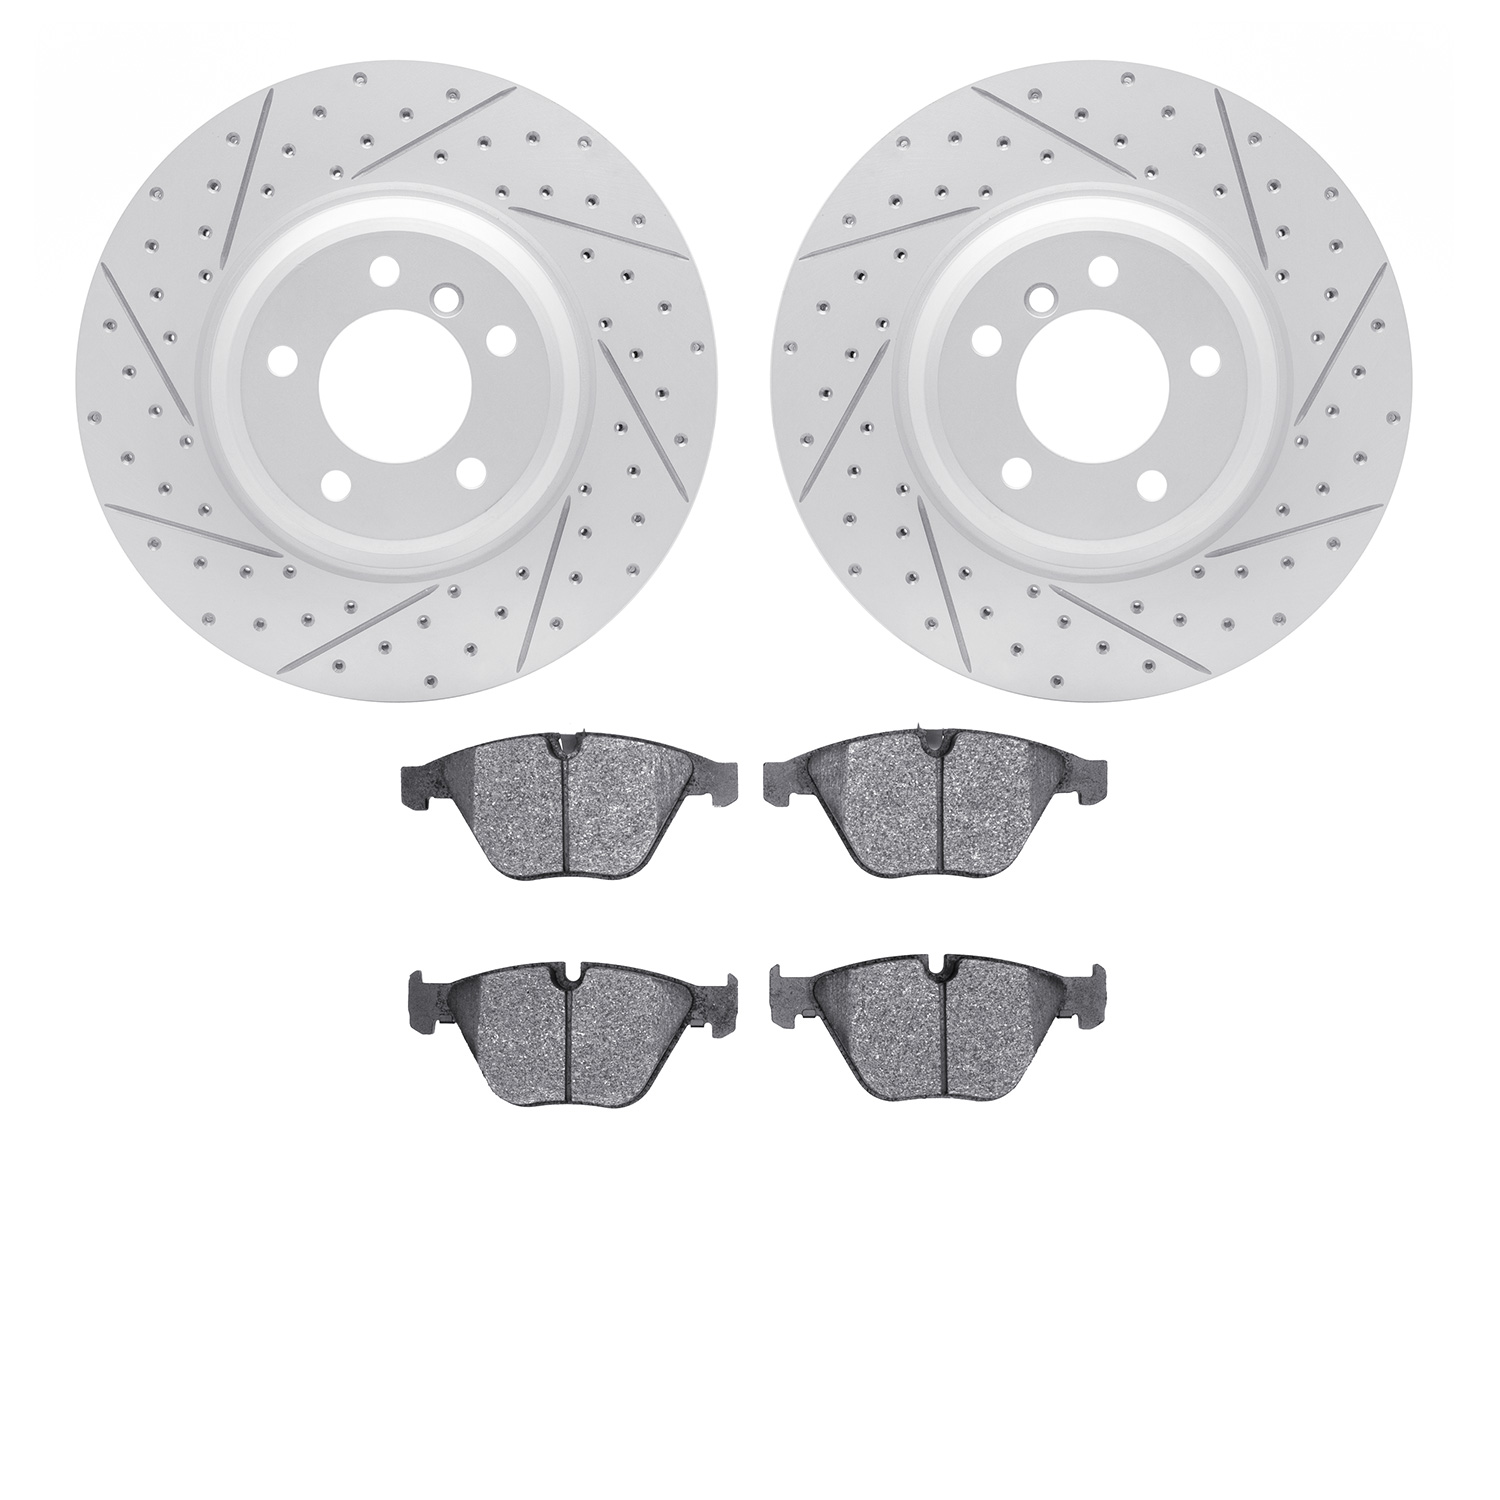 2602-31144 Geoperformance Drilled/Slotted Rotors w/5000 Euro Ceramic Brake Pads Kit, 2007-2015 BMW, Position: Front